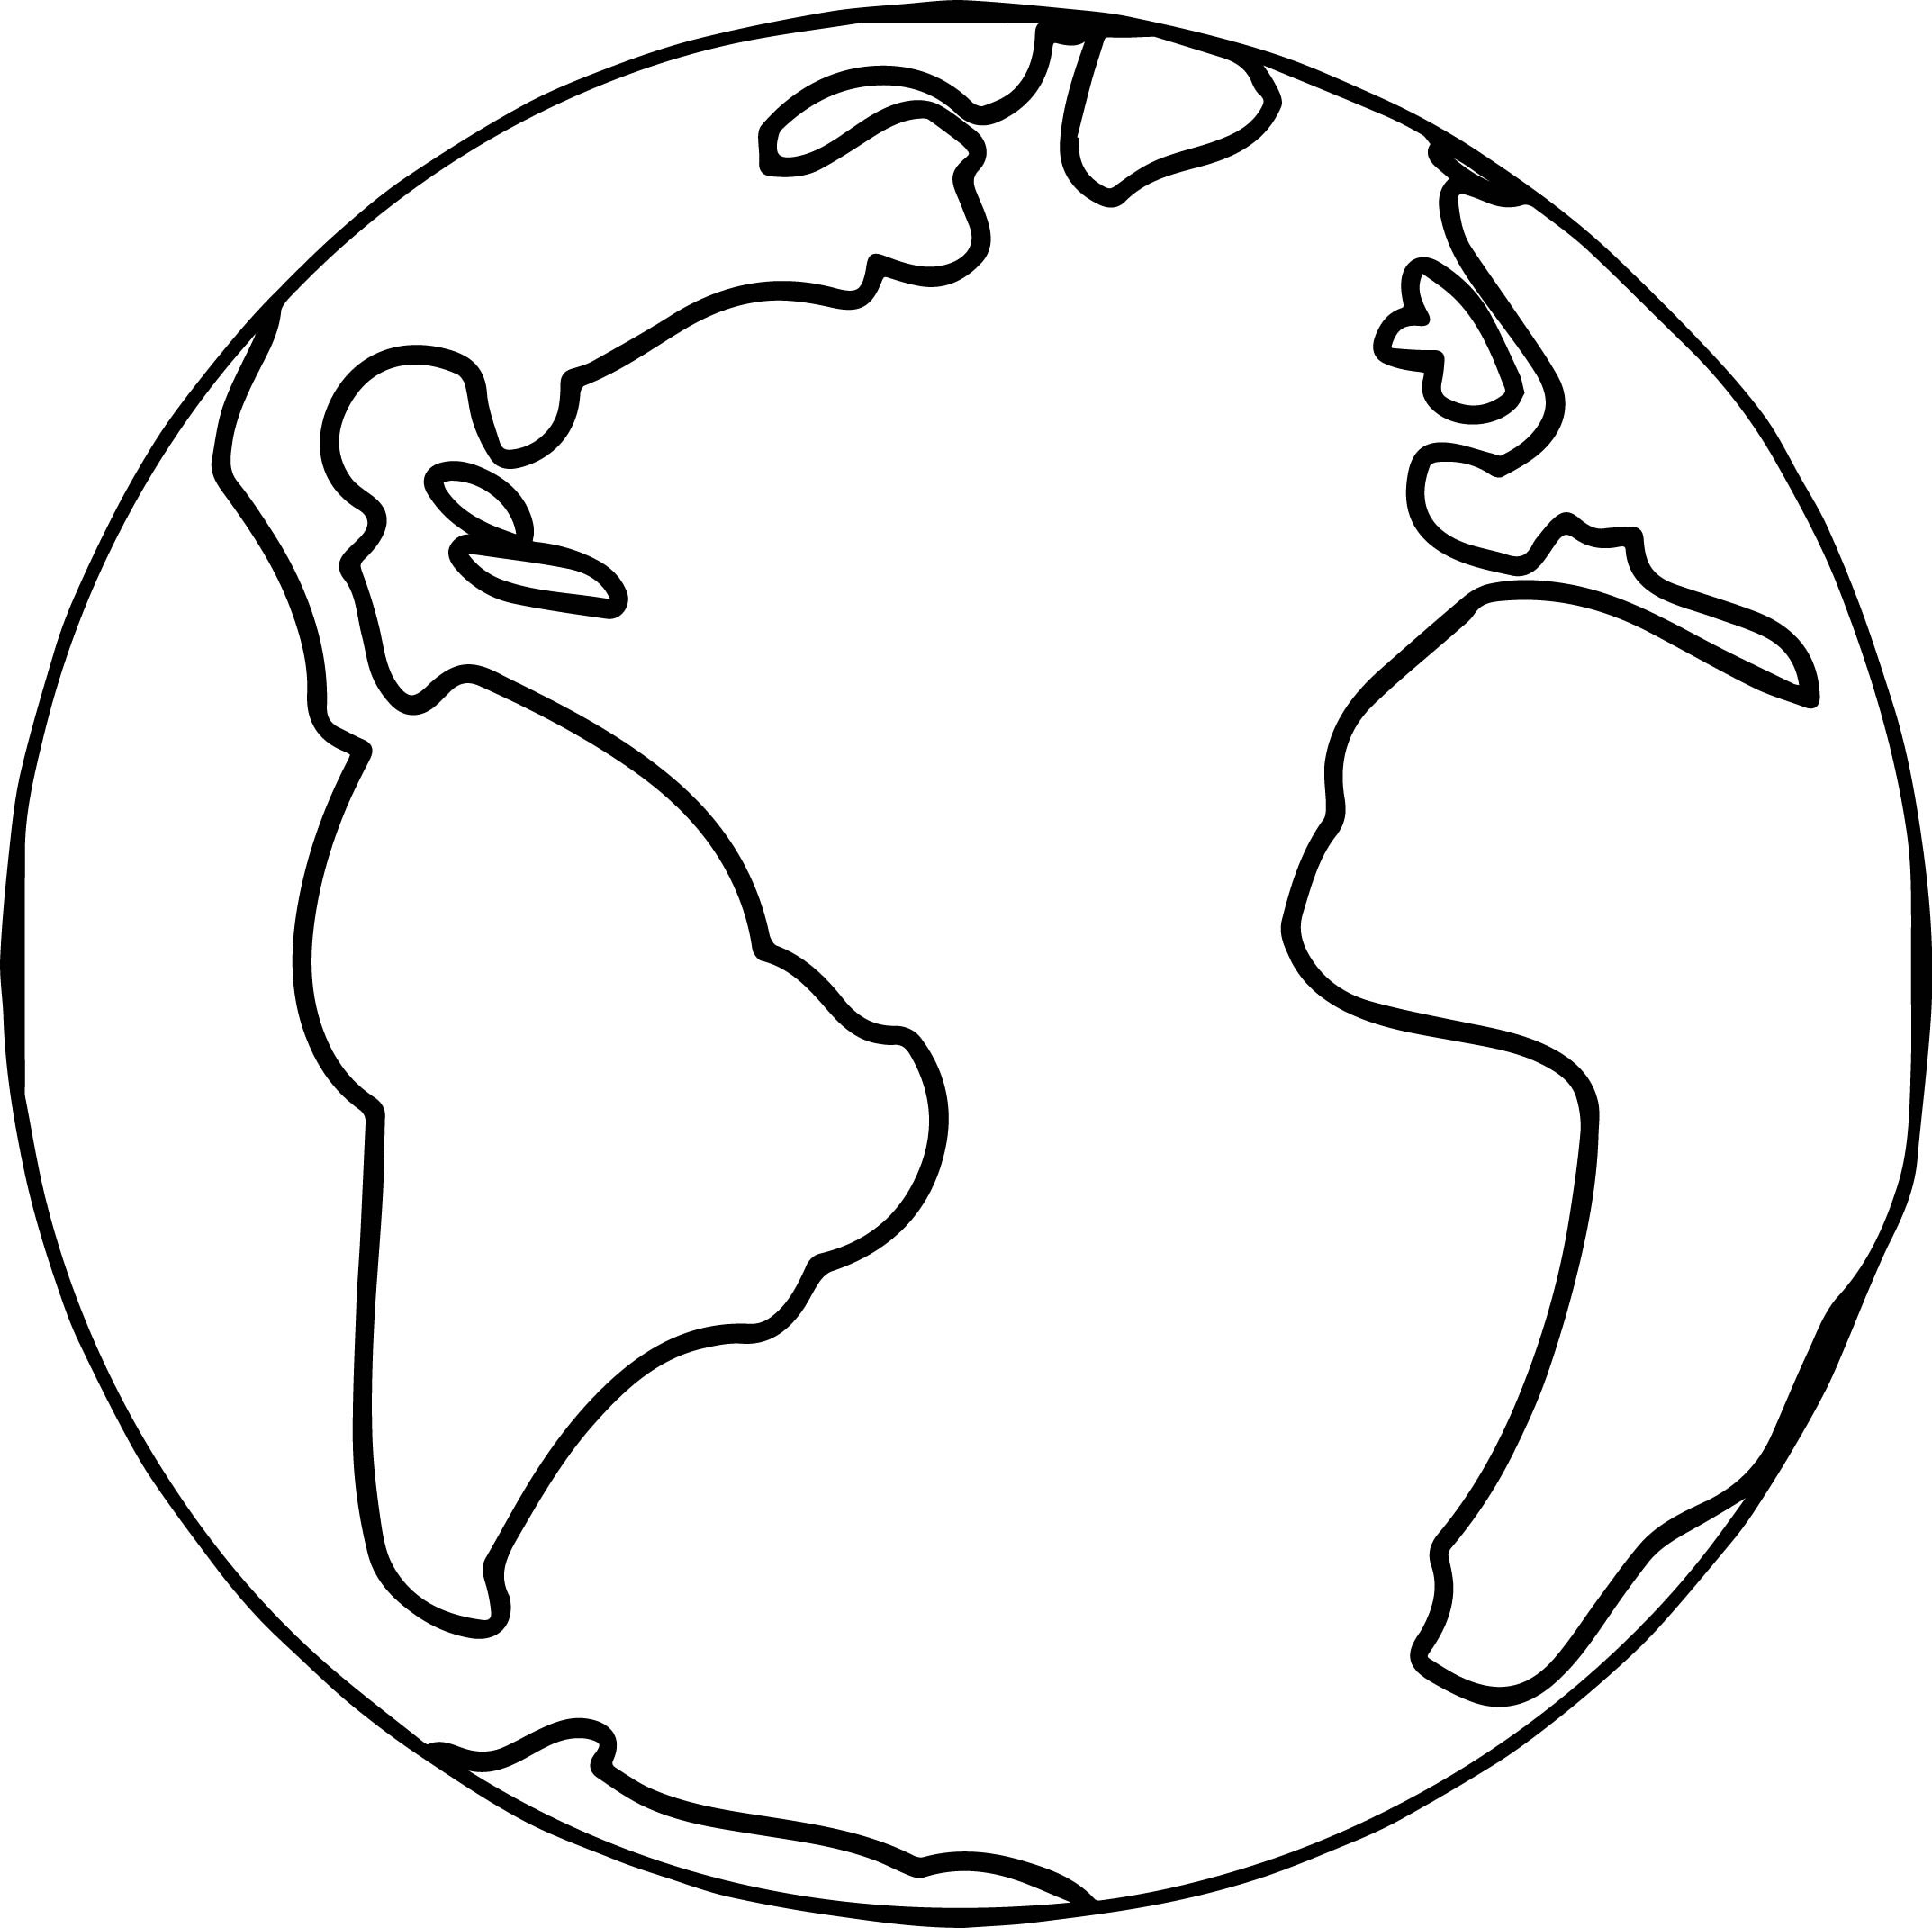 Printable Earth Coloring Pages | Free Download Best Printable Earth - Earth Coloring Pages Free Printable